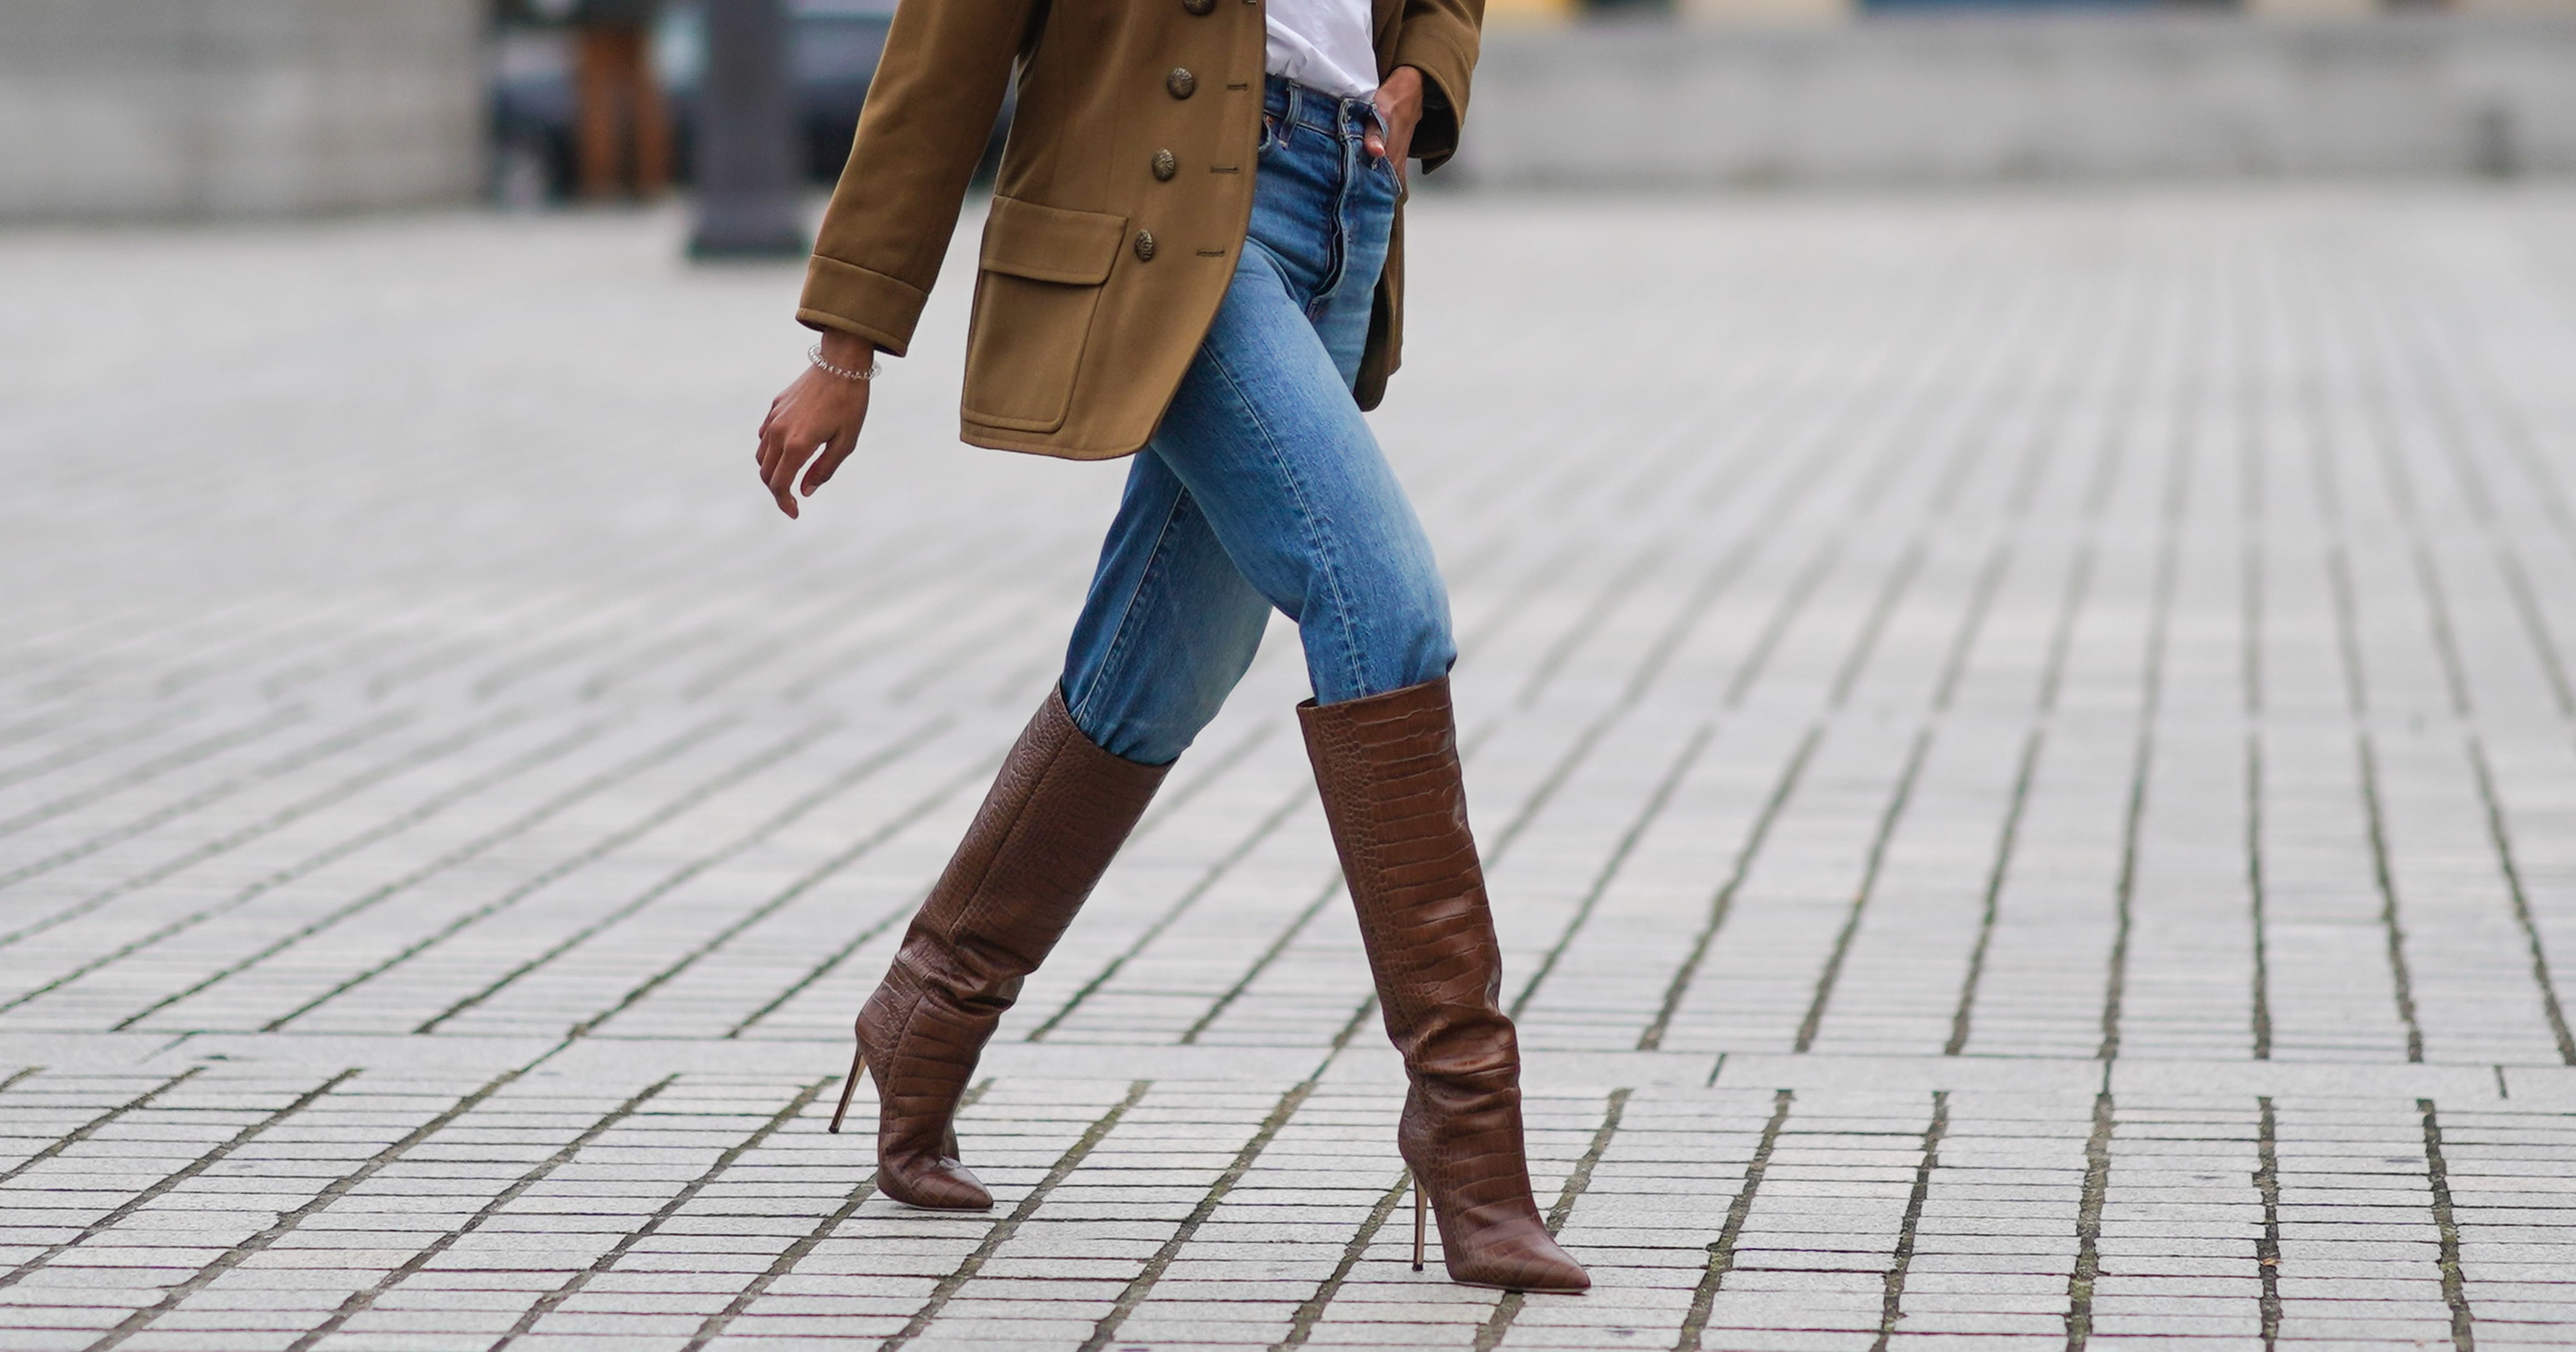 The Best and Most Stylish Boots For Women on Amazon